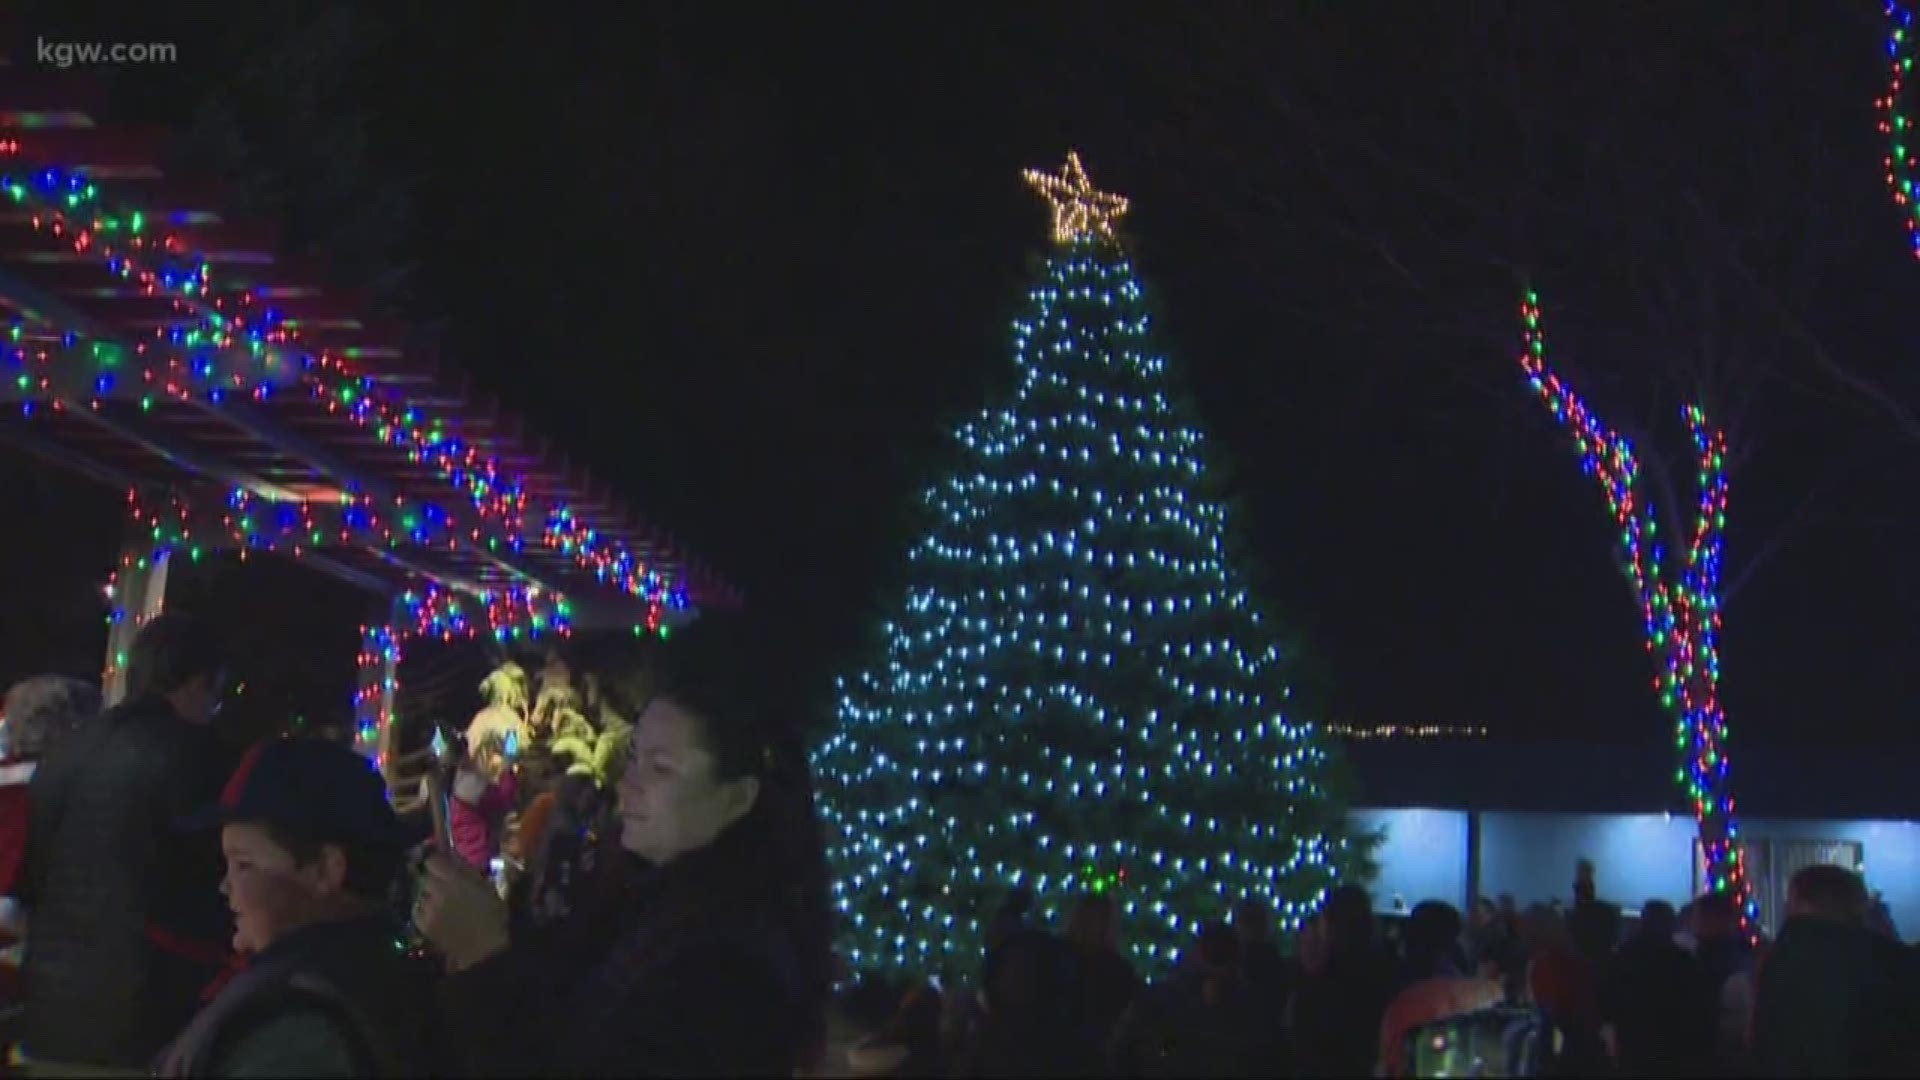 We went to Washougal to capture some of the holiday spirit happening in smaller towns around the metro area.